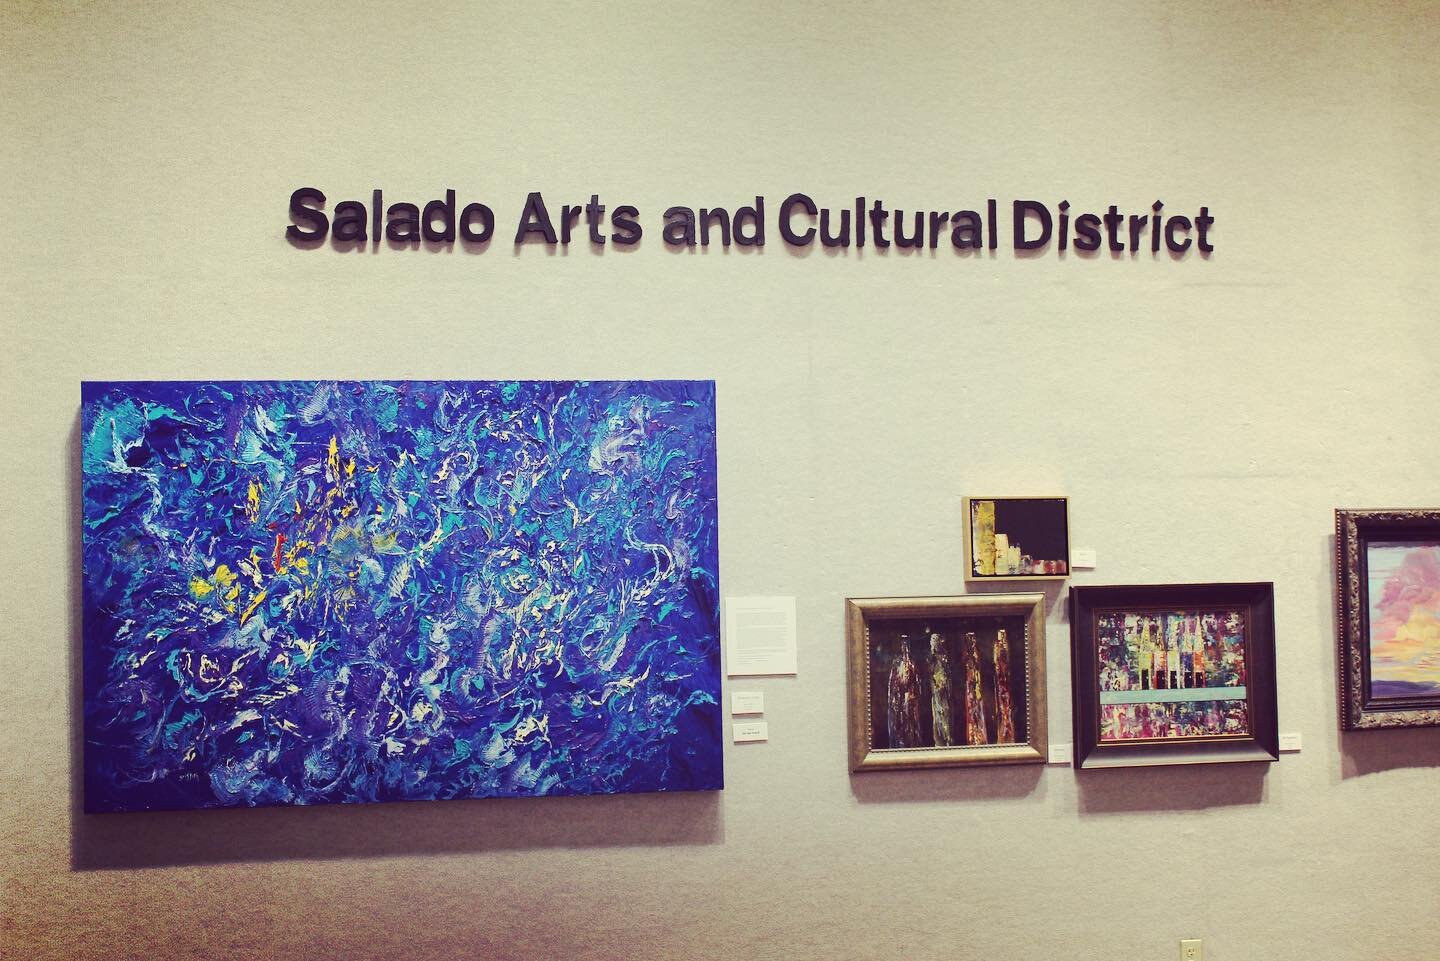 Come see the Salado exhibit at the Cultural Activities Center in Temple, Texas. August 29-October 26.